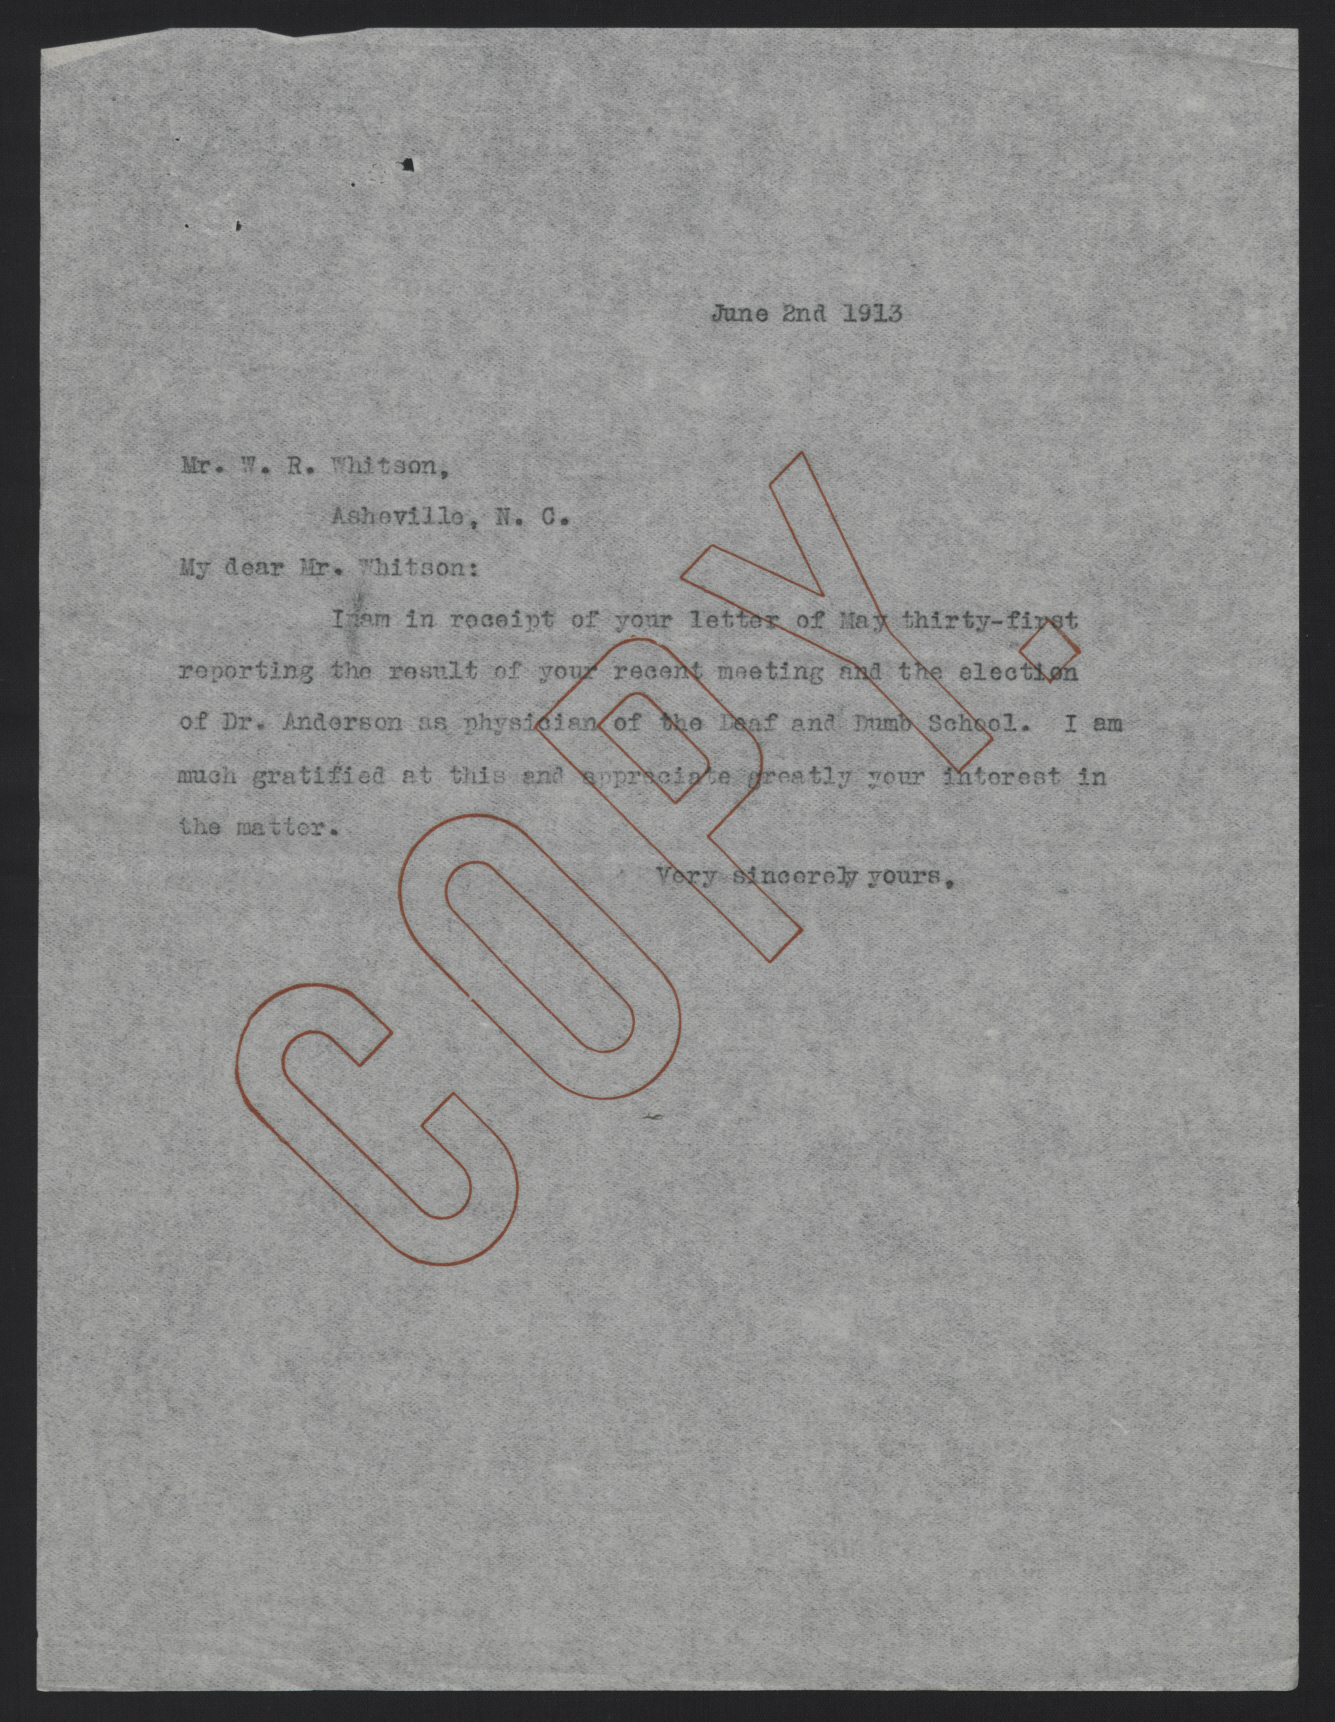 Letter from Craig to Whitson, June 2, 1913